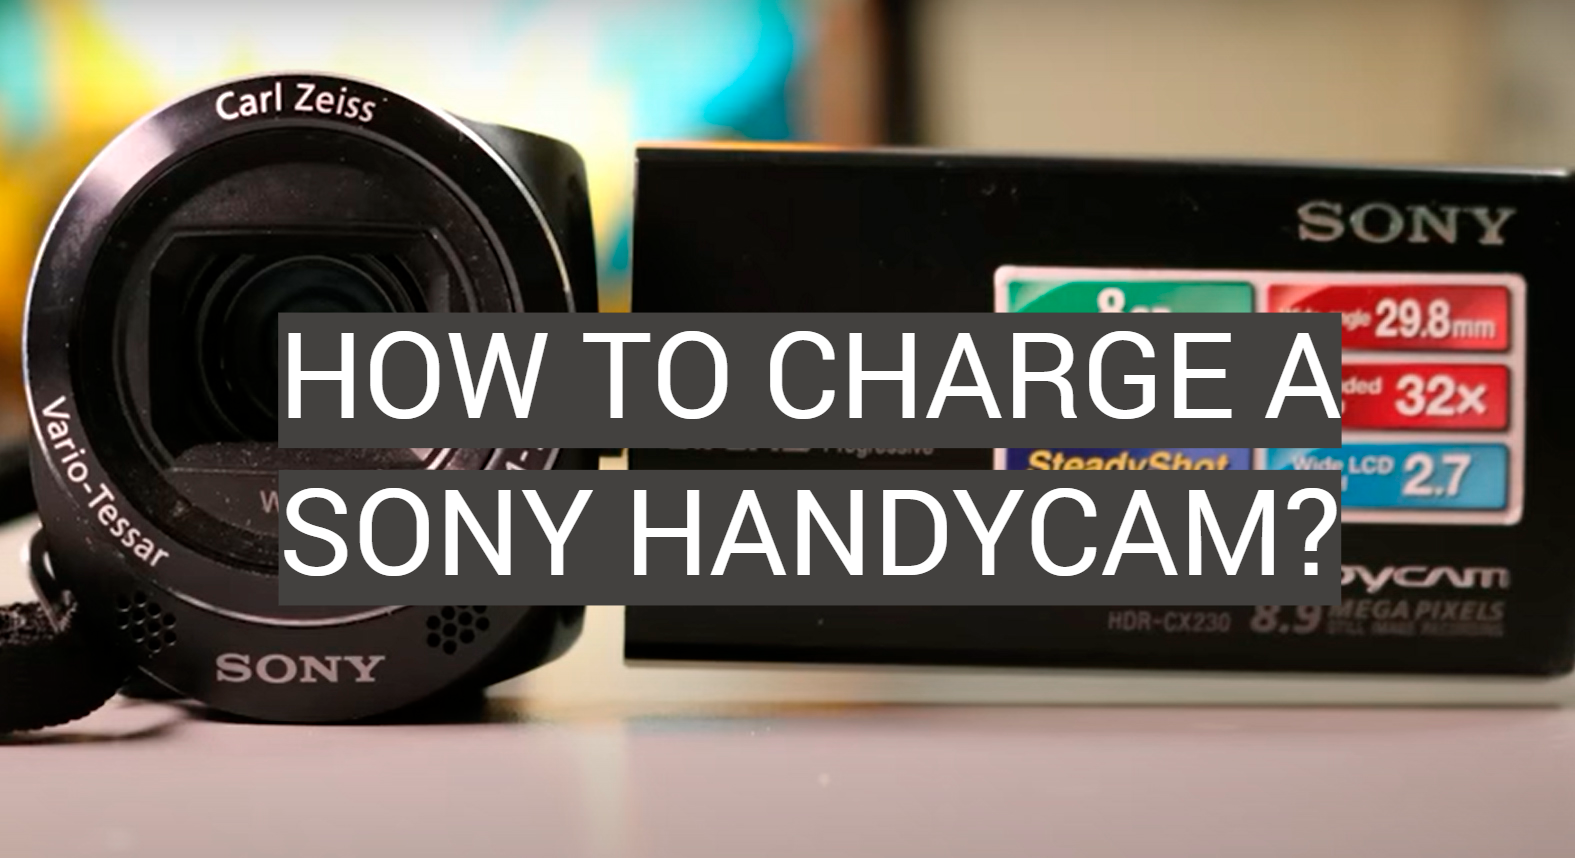 How to Charge a Sony Handycam?